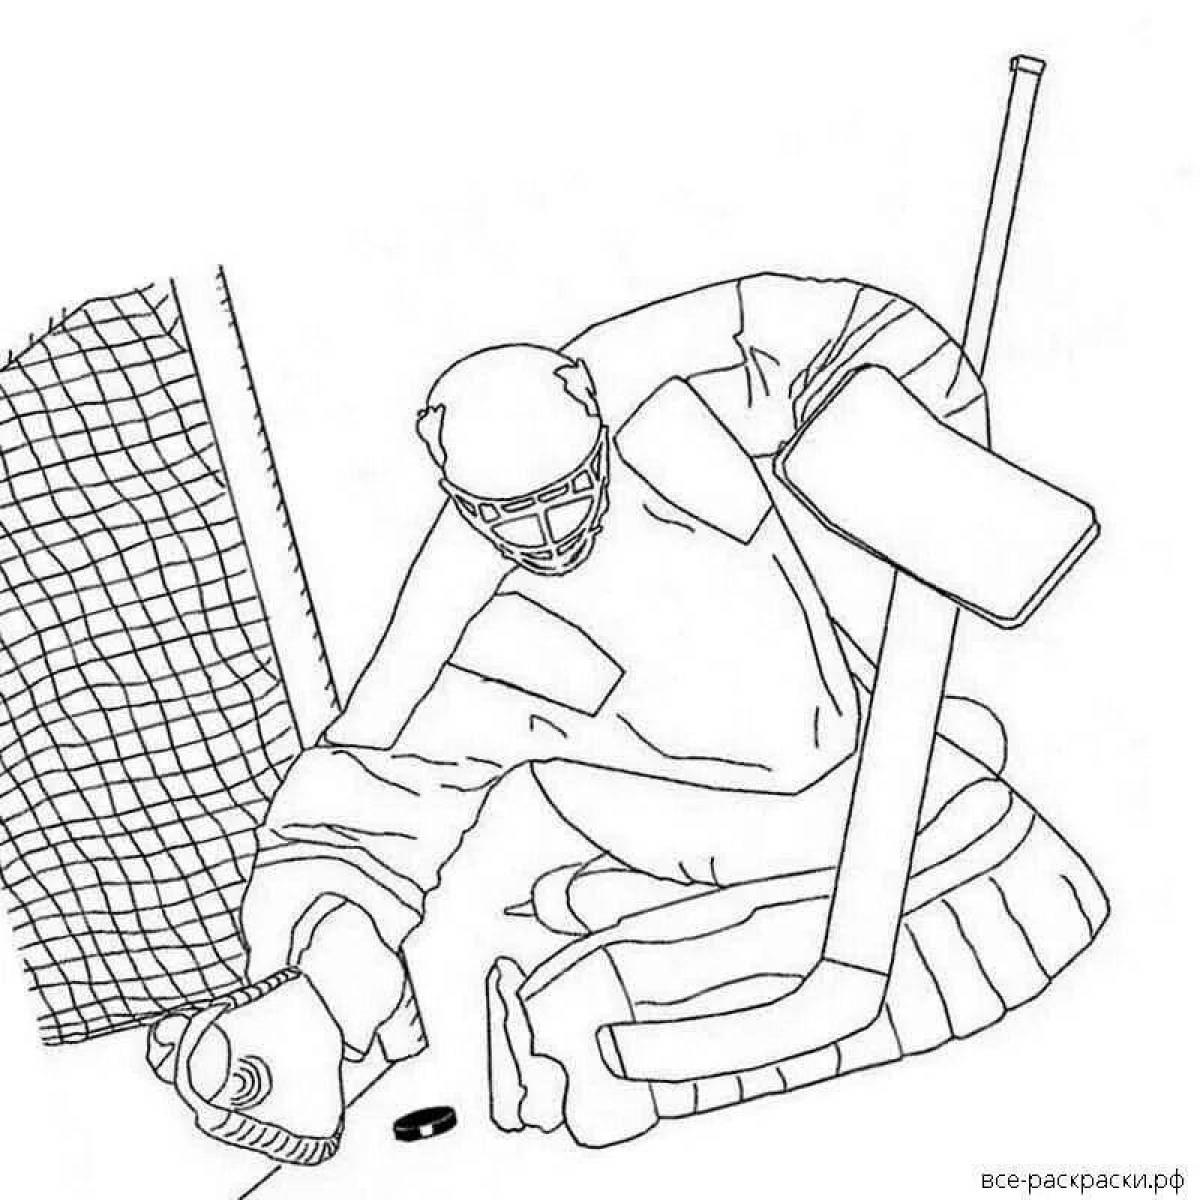 Vibrant Hockey Goalie Coloring Page